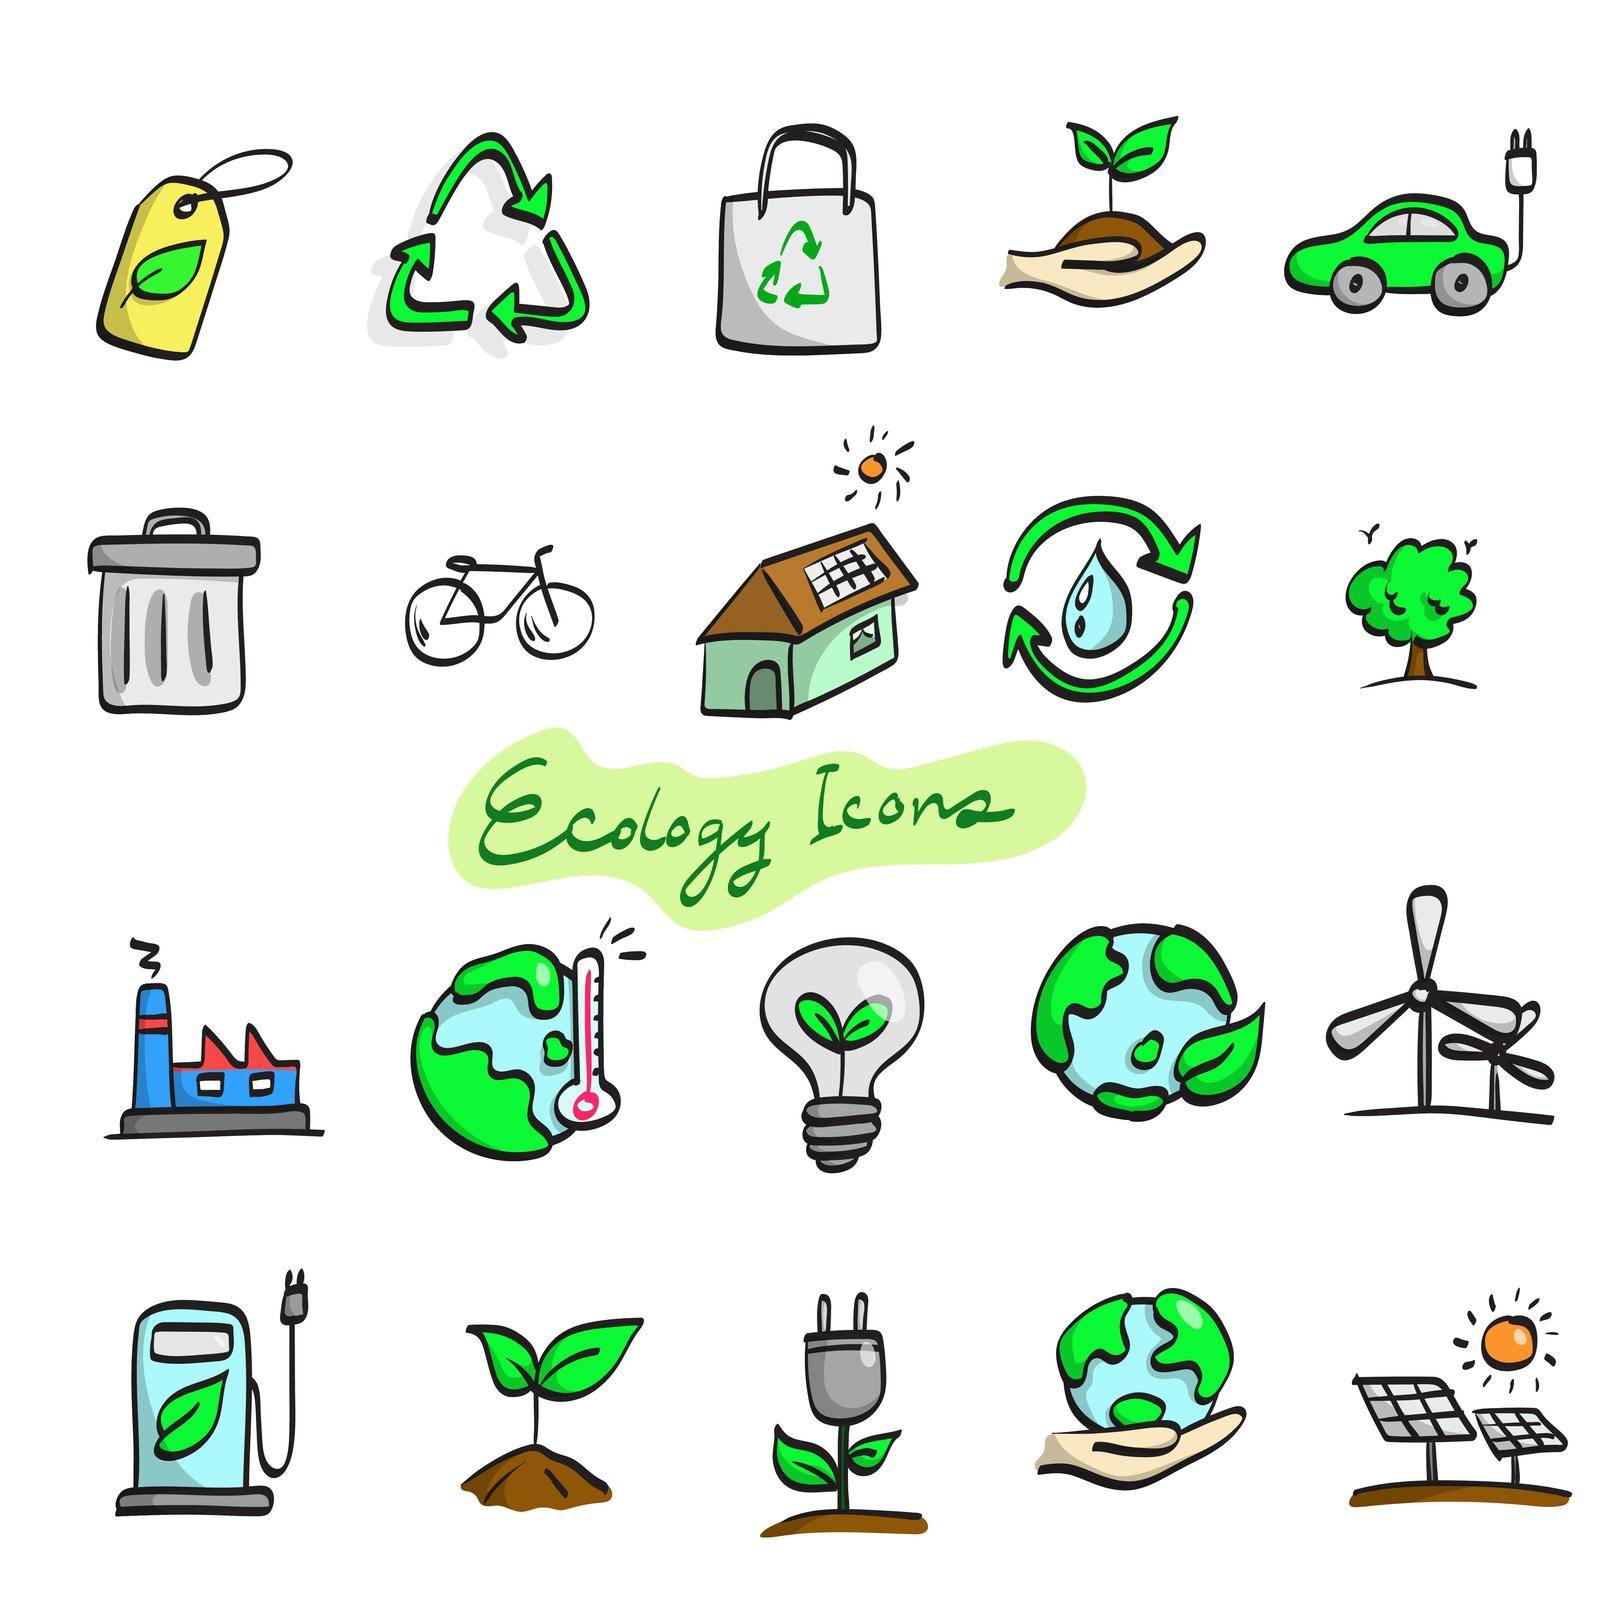 colorful ecology icon set illustration vector hand drawn isolated on white background 